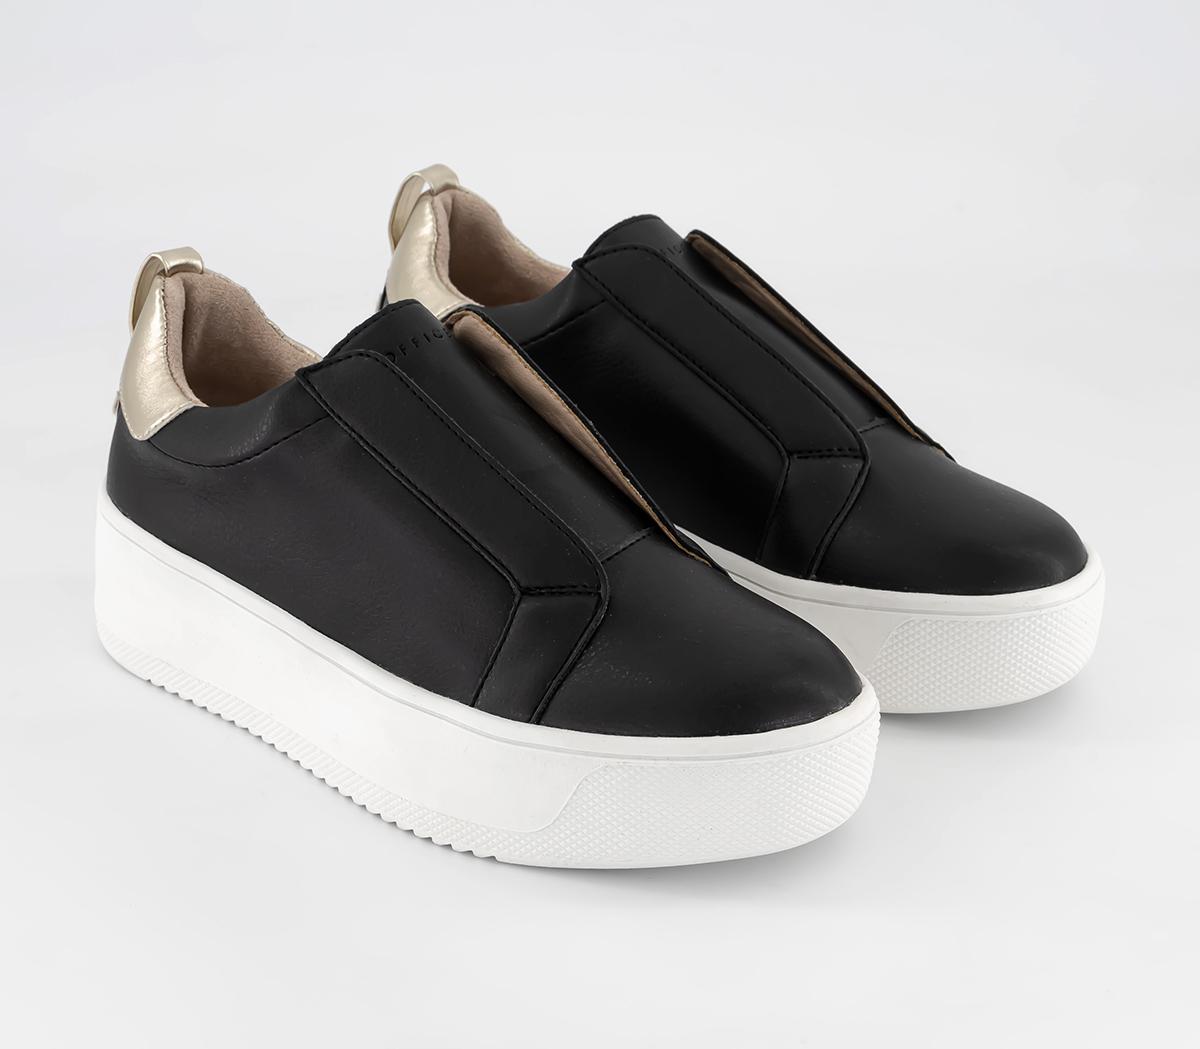 OFFICE For Keeps Slip On Trainers Black - Flat Shoes for Women